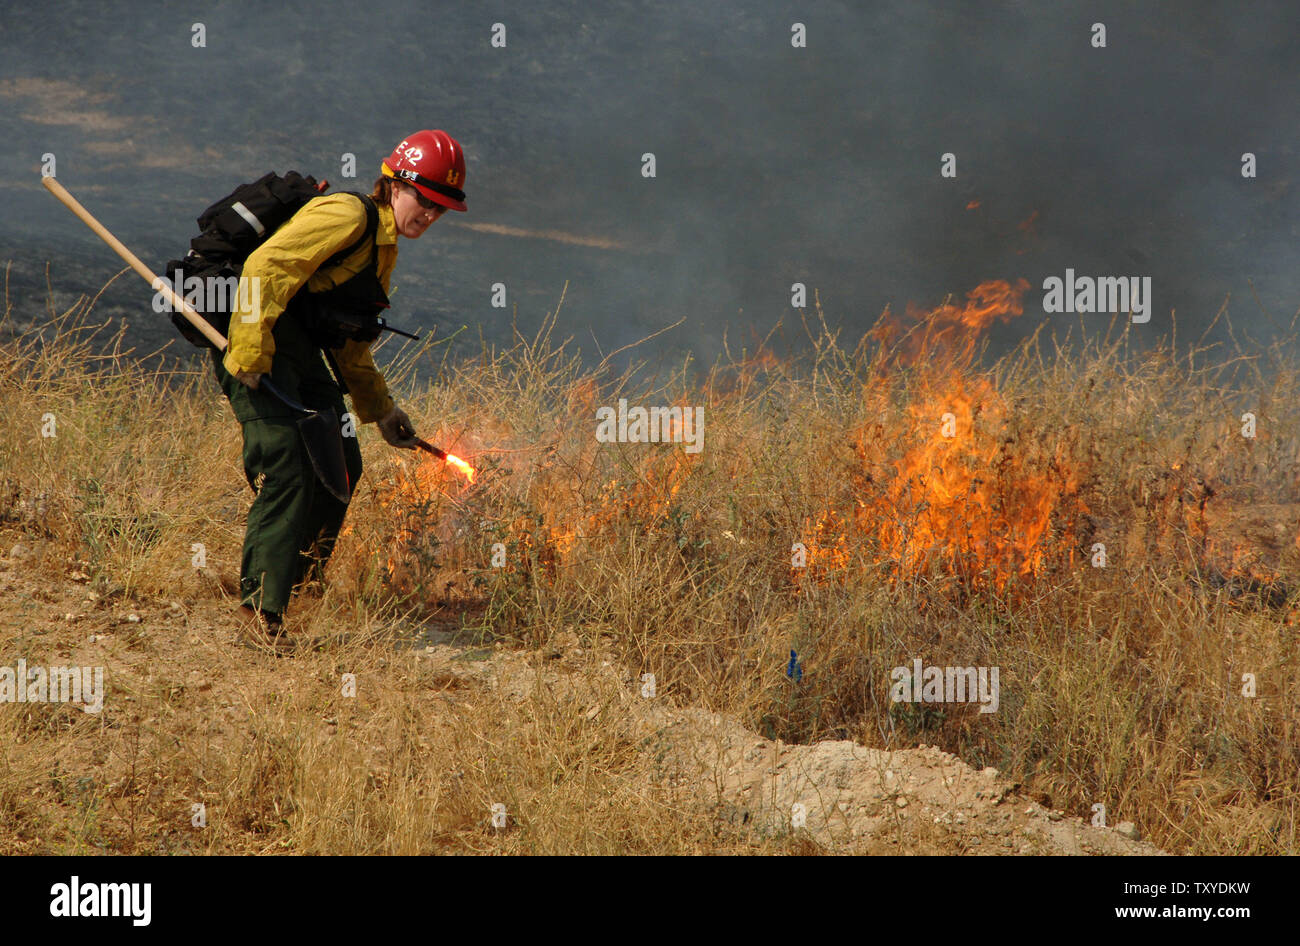 A fireman sets a controlled burn to help combat a wildfire in Yucaipa, California on July 16, 2006. Crews battling wildfires that had destroyed 58 homes and blackened more than 110 square miles faced a threat of thunderstorms Sunday that could produce lightning capable of starting new blazes or heavy rain that would flood the newly denuded land. (UPI Photo/Jim Ruymen) Stock Photo